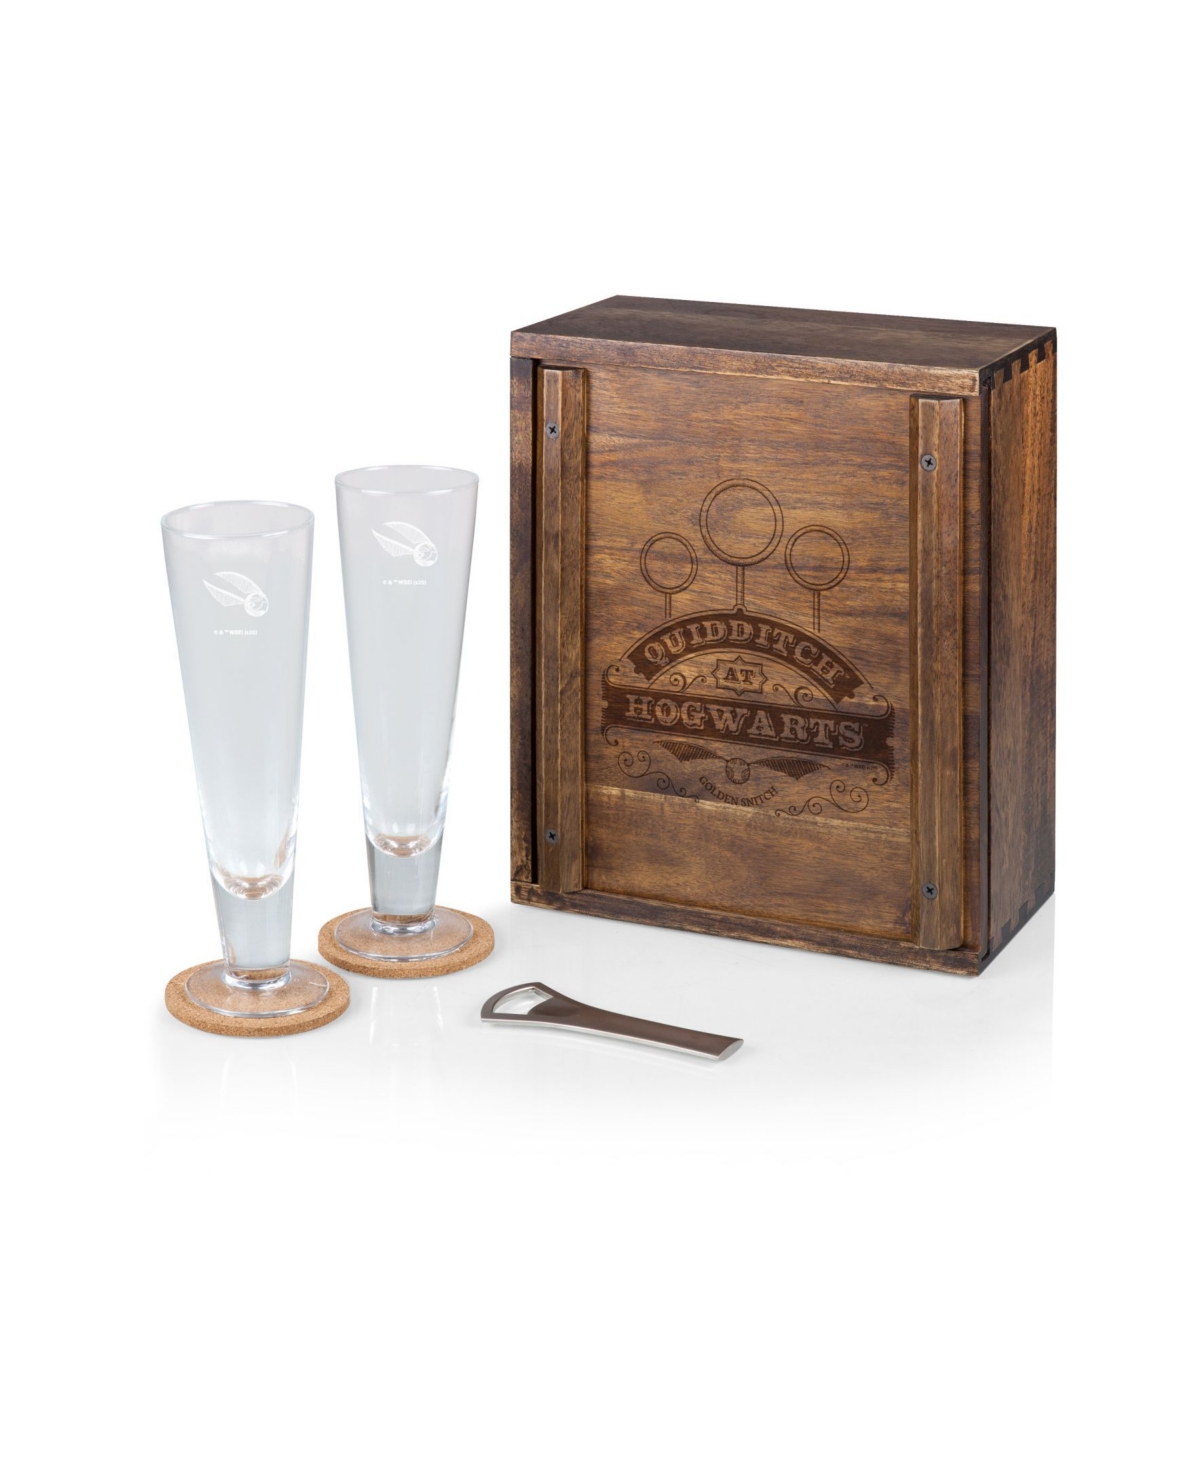 LEGACY HARRY POTTER QUIDDITCH BEVERAGE GLASS GIFT SET, 6 PIECES